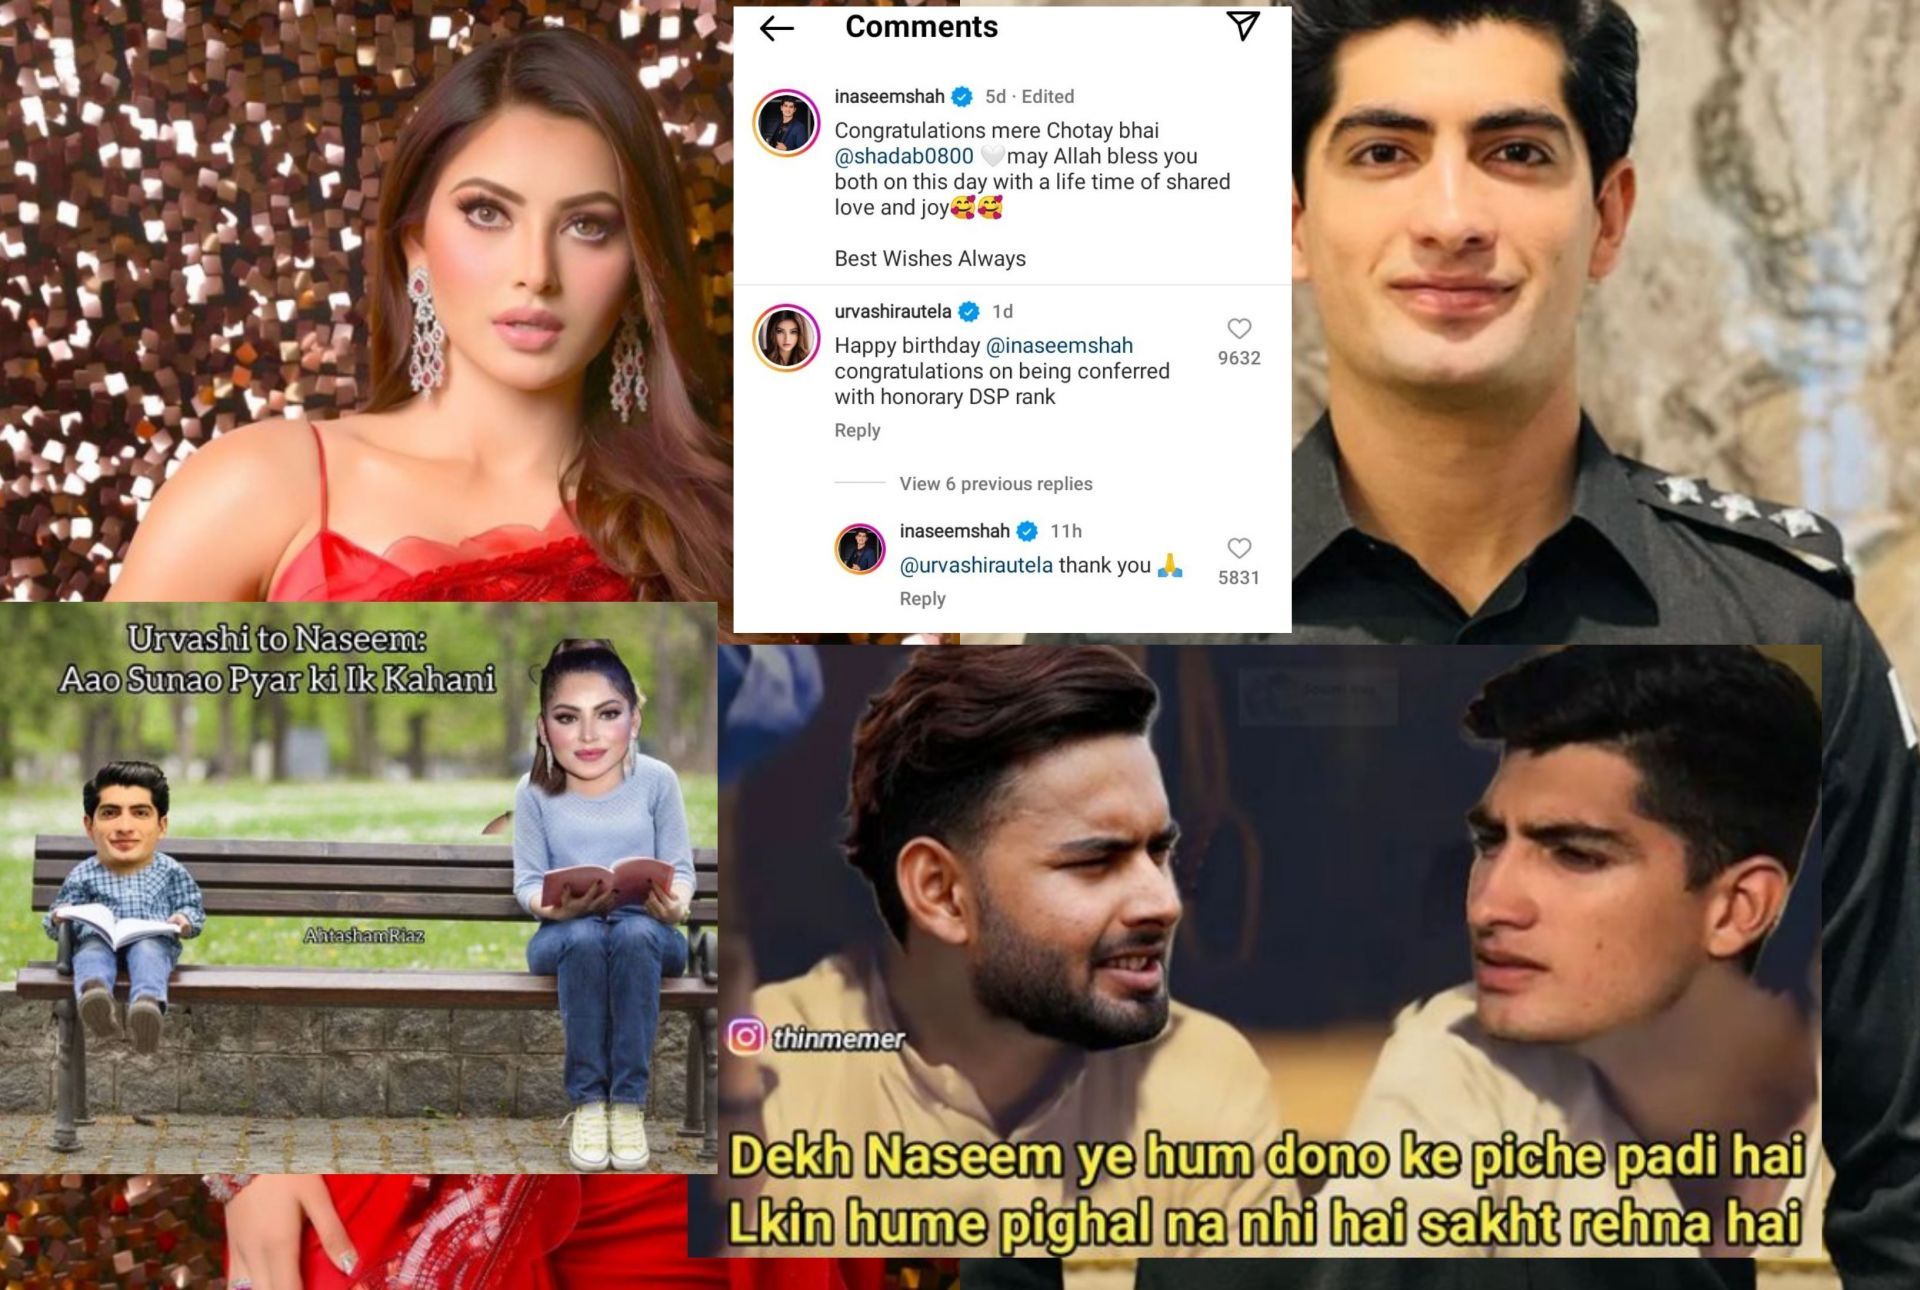 Fans react after Urvashi Rautela and Naseem Shah interact on Instagram. 